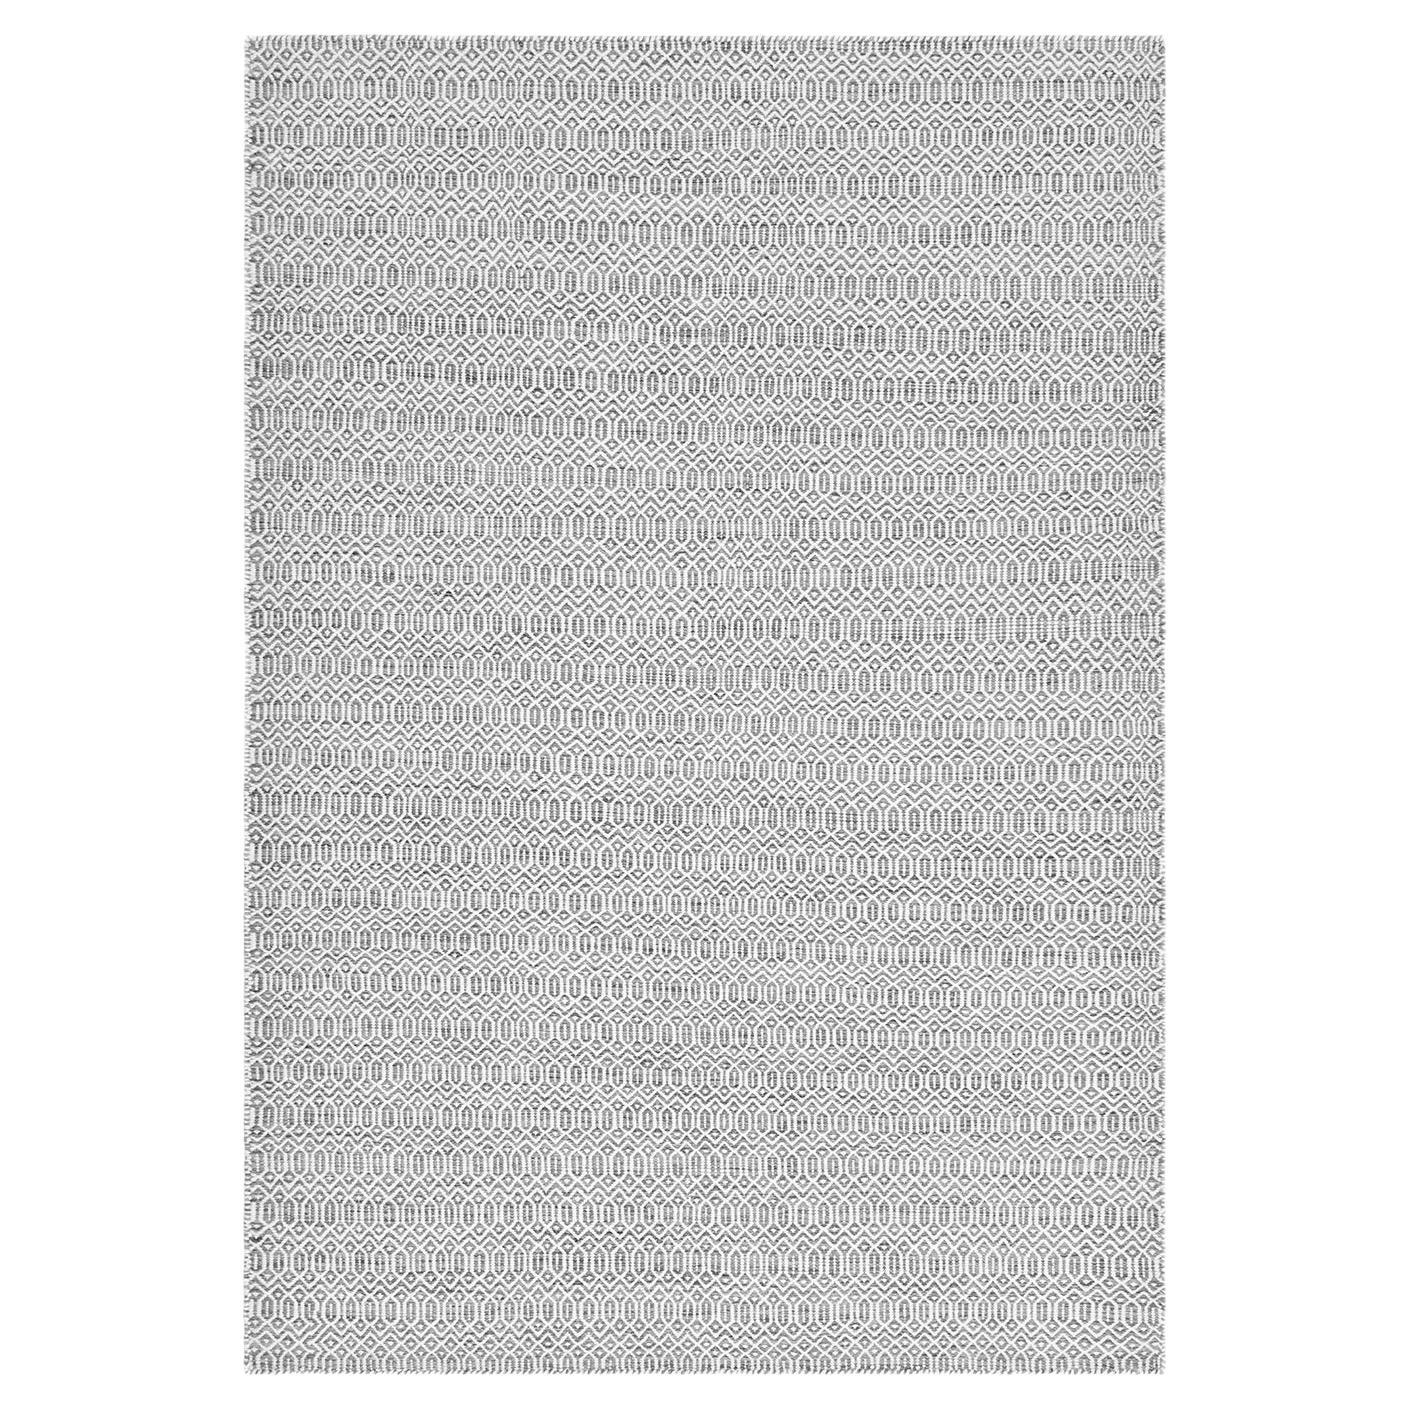 Solo Rugs Flatweave Geometric Hand Woven Gray Area Rug For Sale